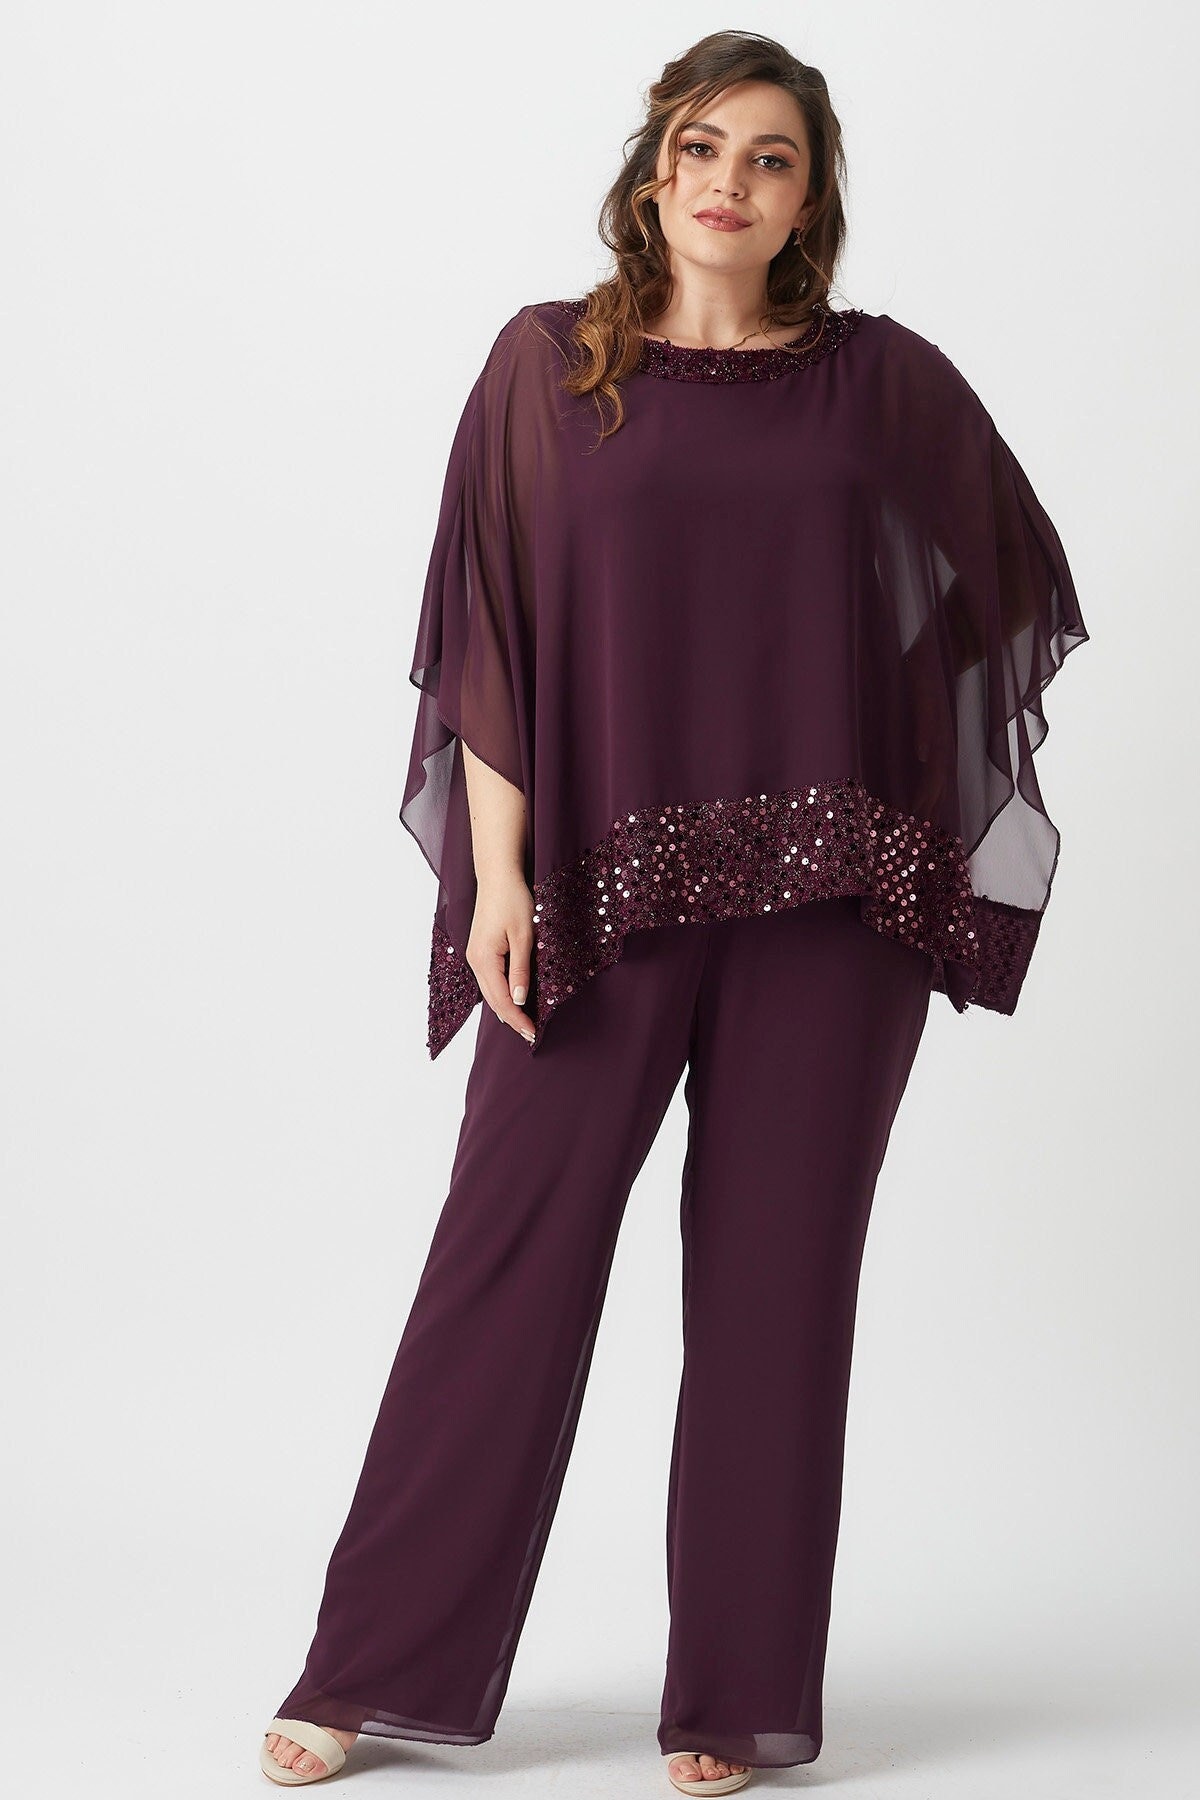 Plus Size Formal Pant Suits for Women -  Canada